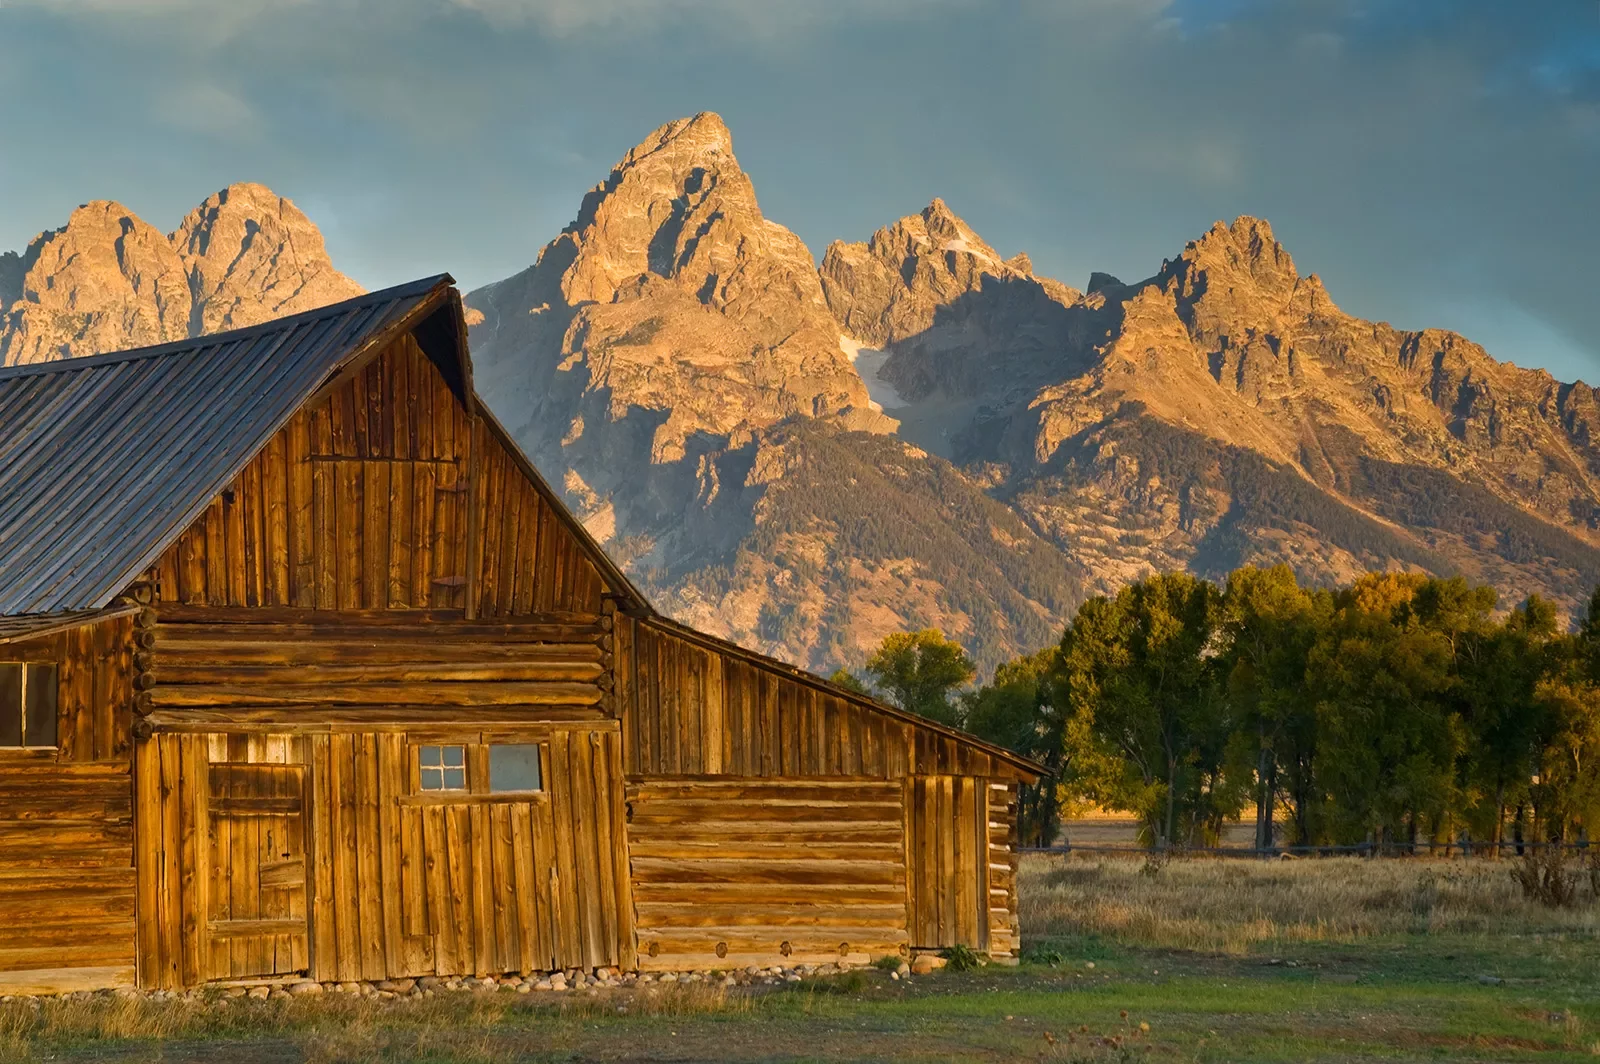 Wooden cabin with rocky mountains in background